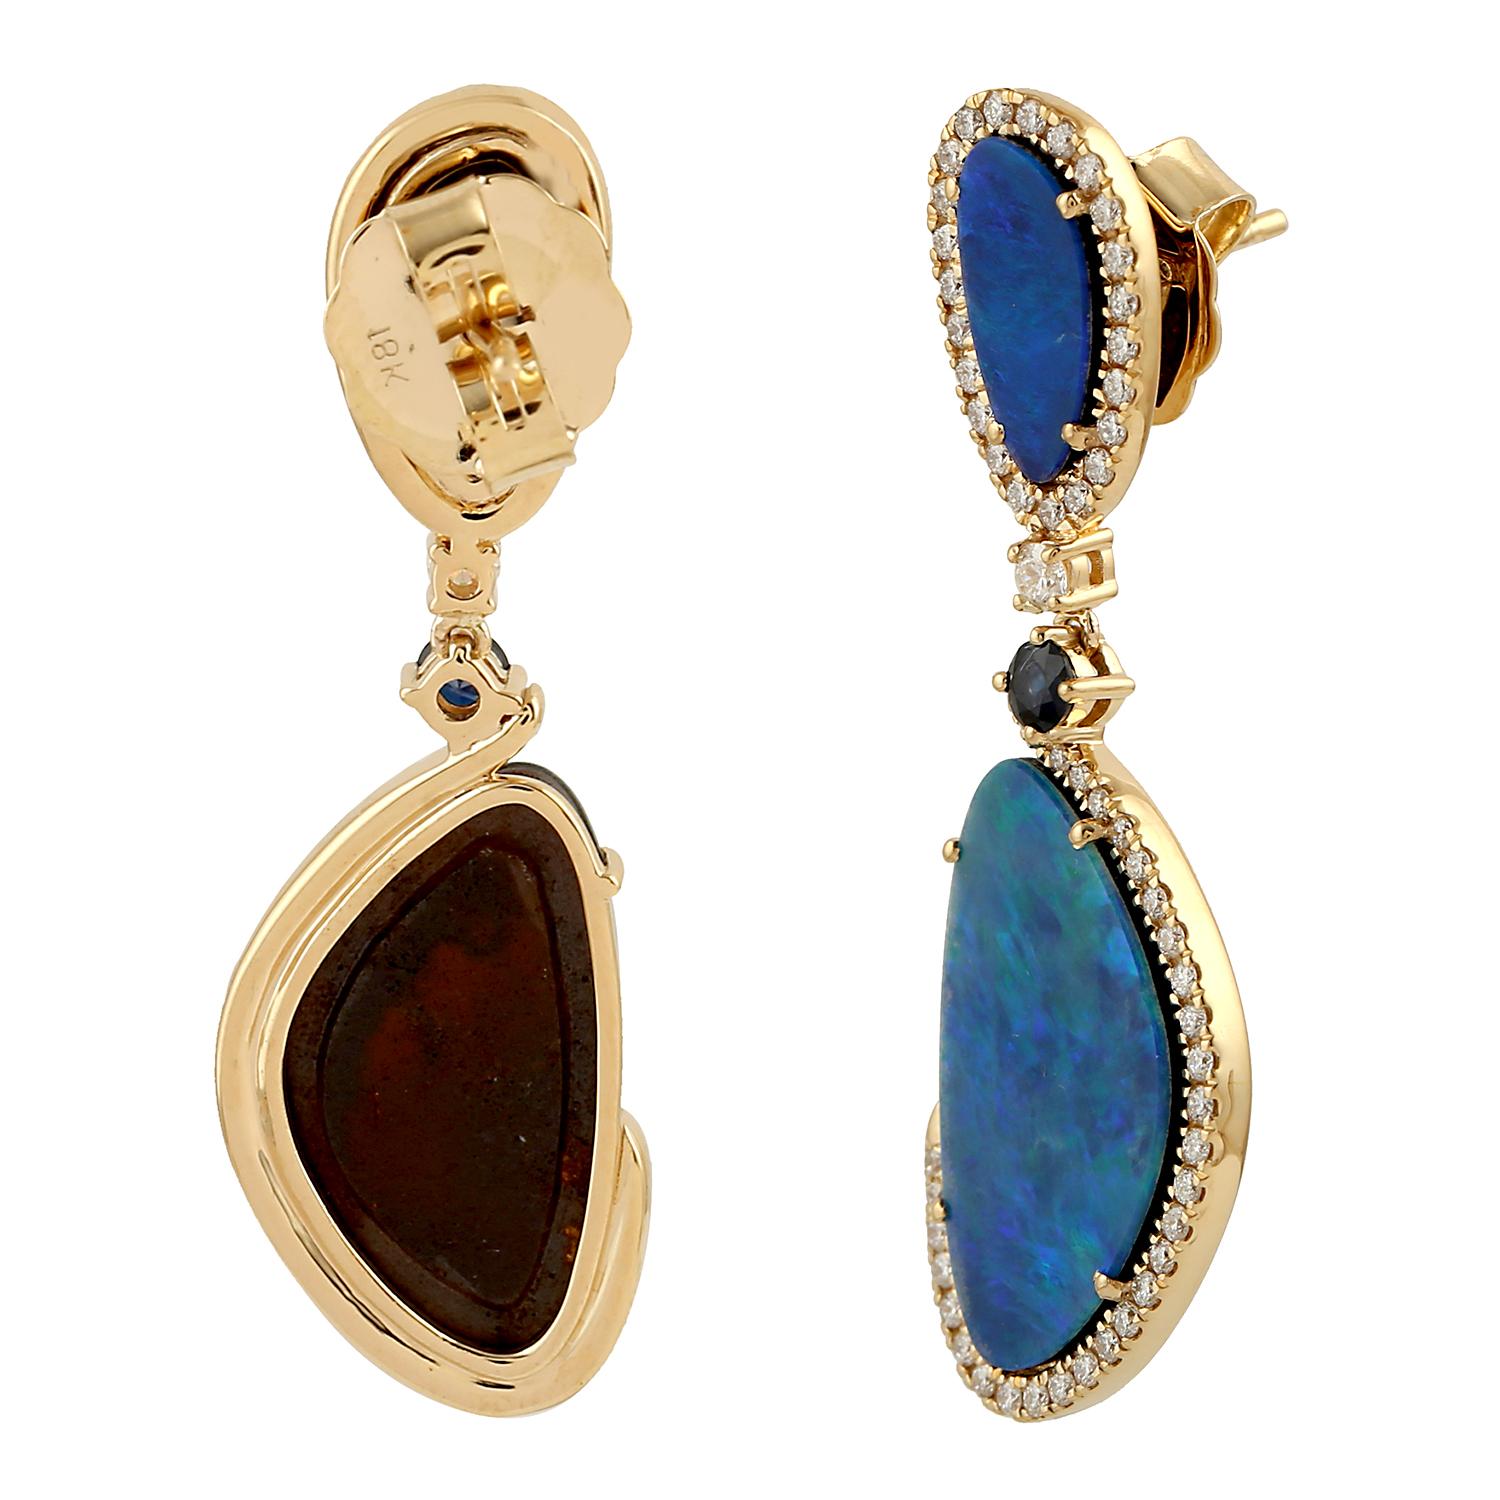 Contemporary 9.06 ct Ethiopian Opal Dangle Earrings With Sapphire & Diamonds In 18k Gold For Sale